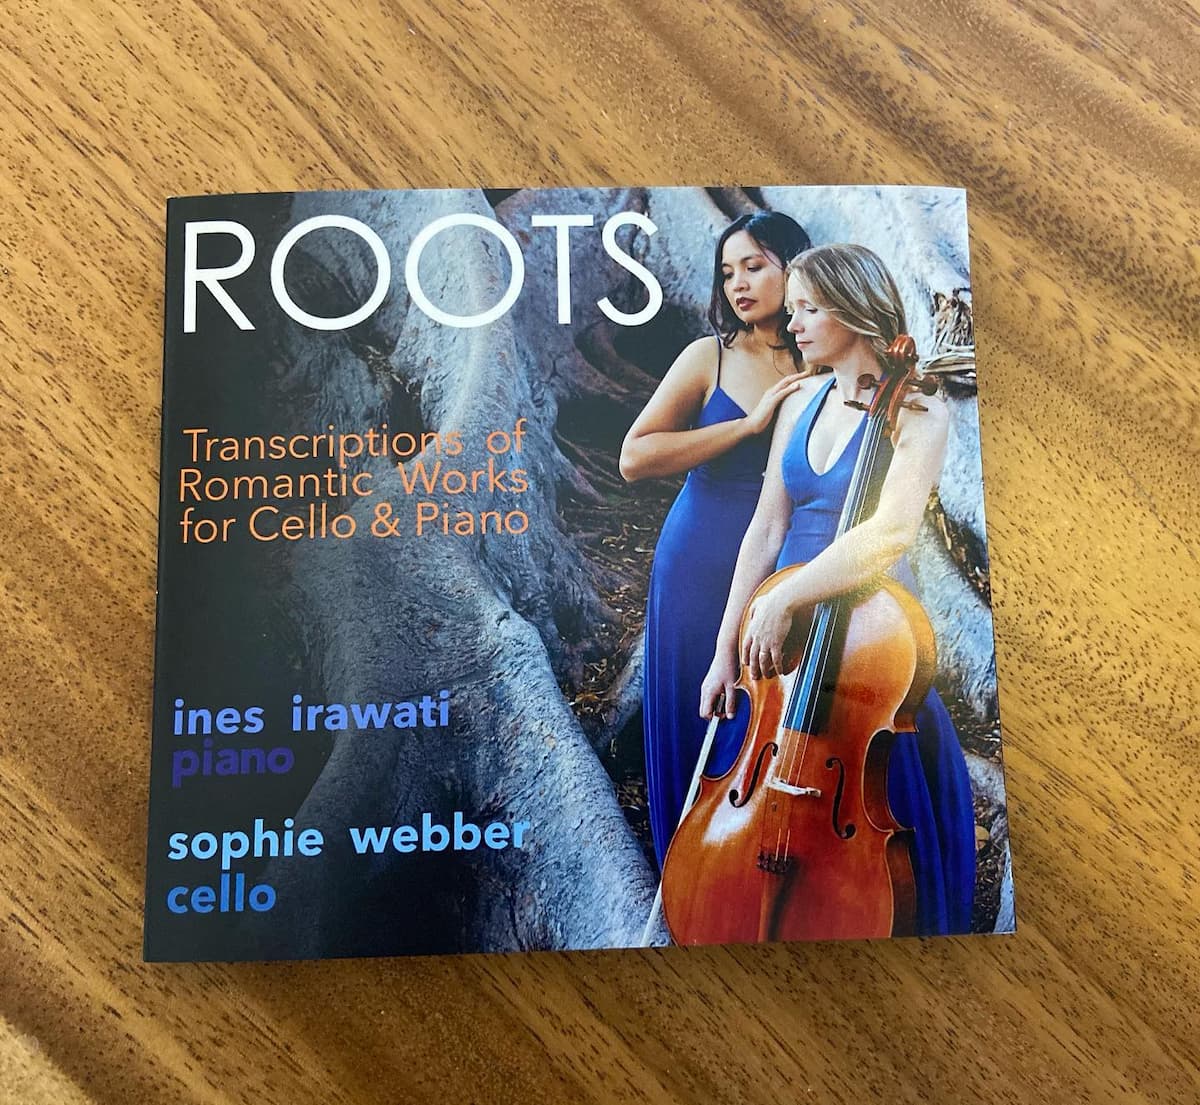 Album cover of Sophie Webber’s Roots: Transcriptions of Romantic Works for Cello and Piano